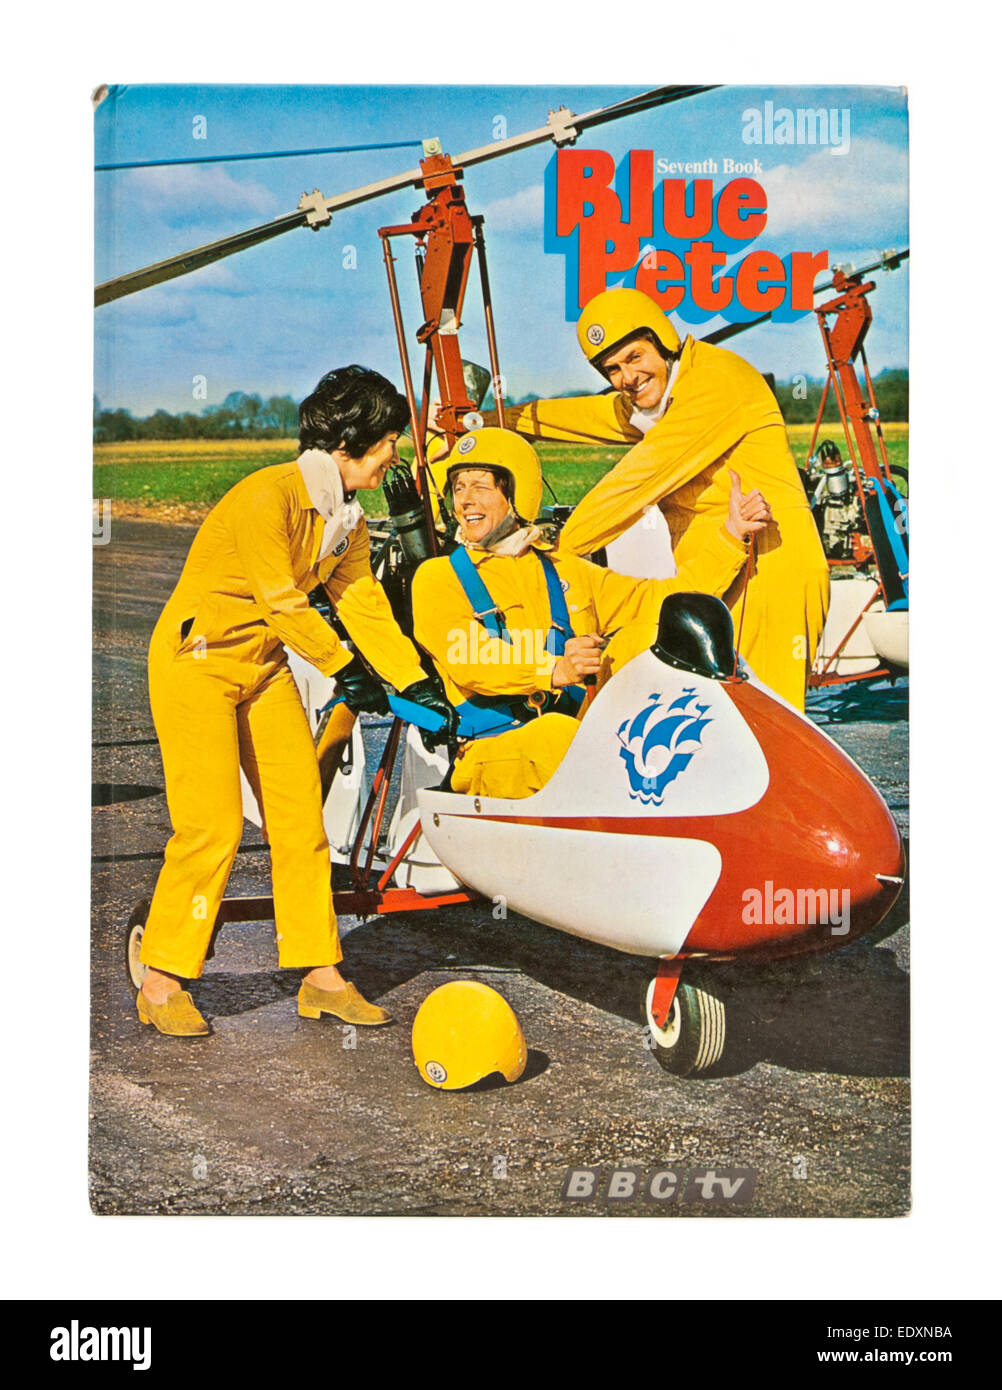 The 7th BBC 'Blue Peter' book from 1971. Blue Peter is a popular British BBC children's television series that started in 1958 Stock Photo